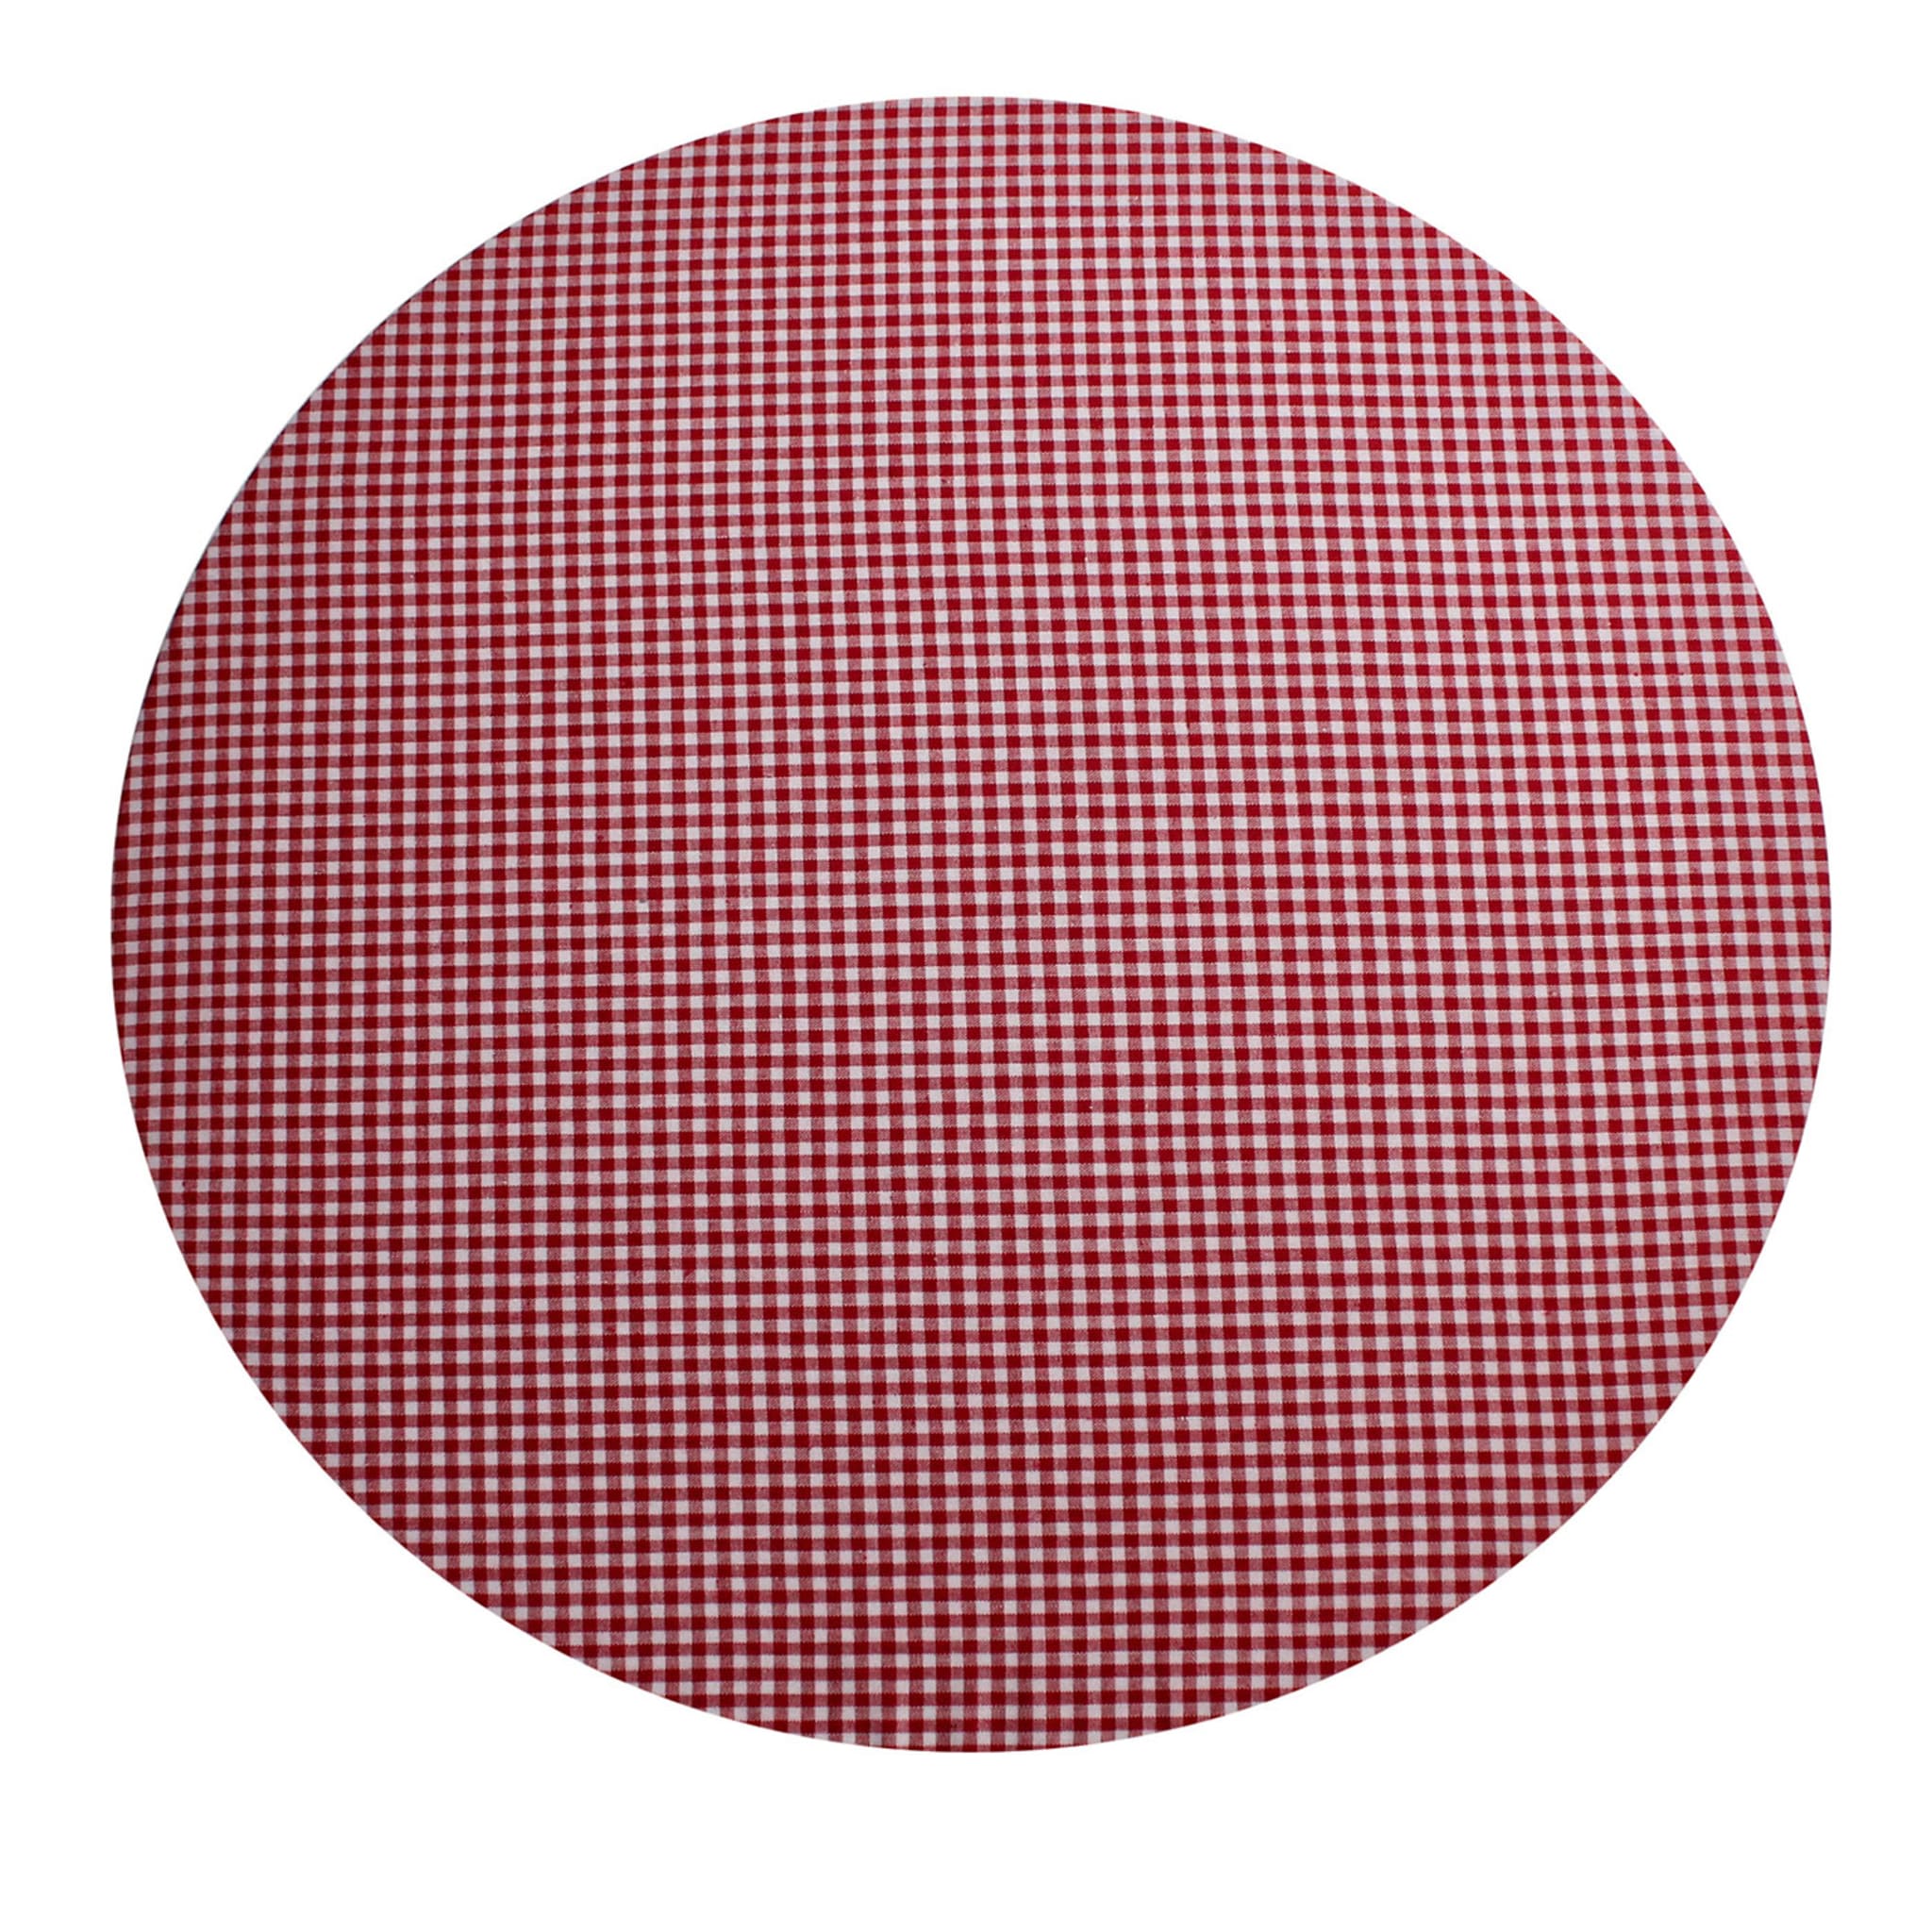 Cuffiette Check Round Red & White Placemat #1 - Main view